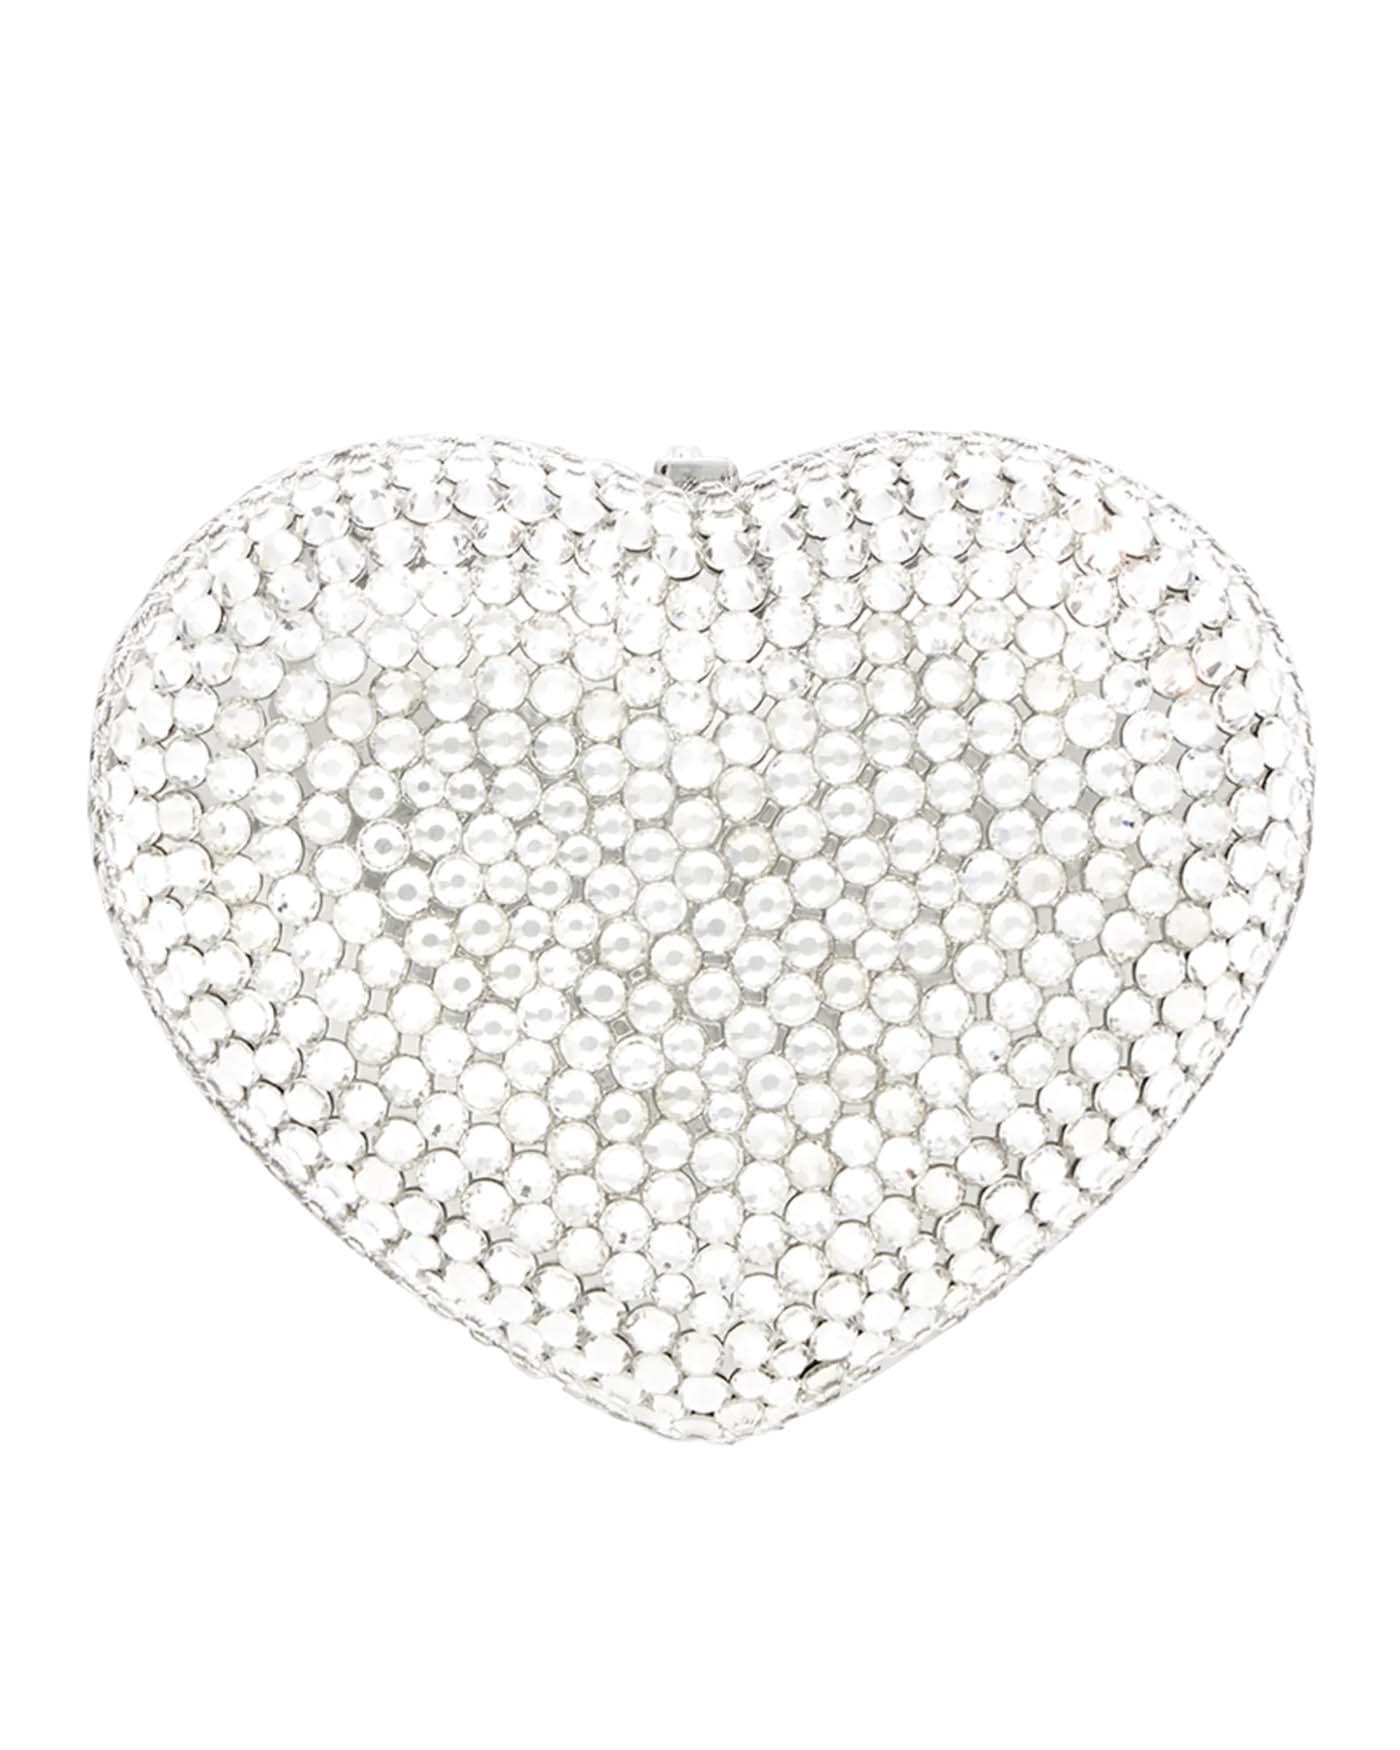 40 Judith Leiber Couture Heart Crystal Pillbox $695 